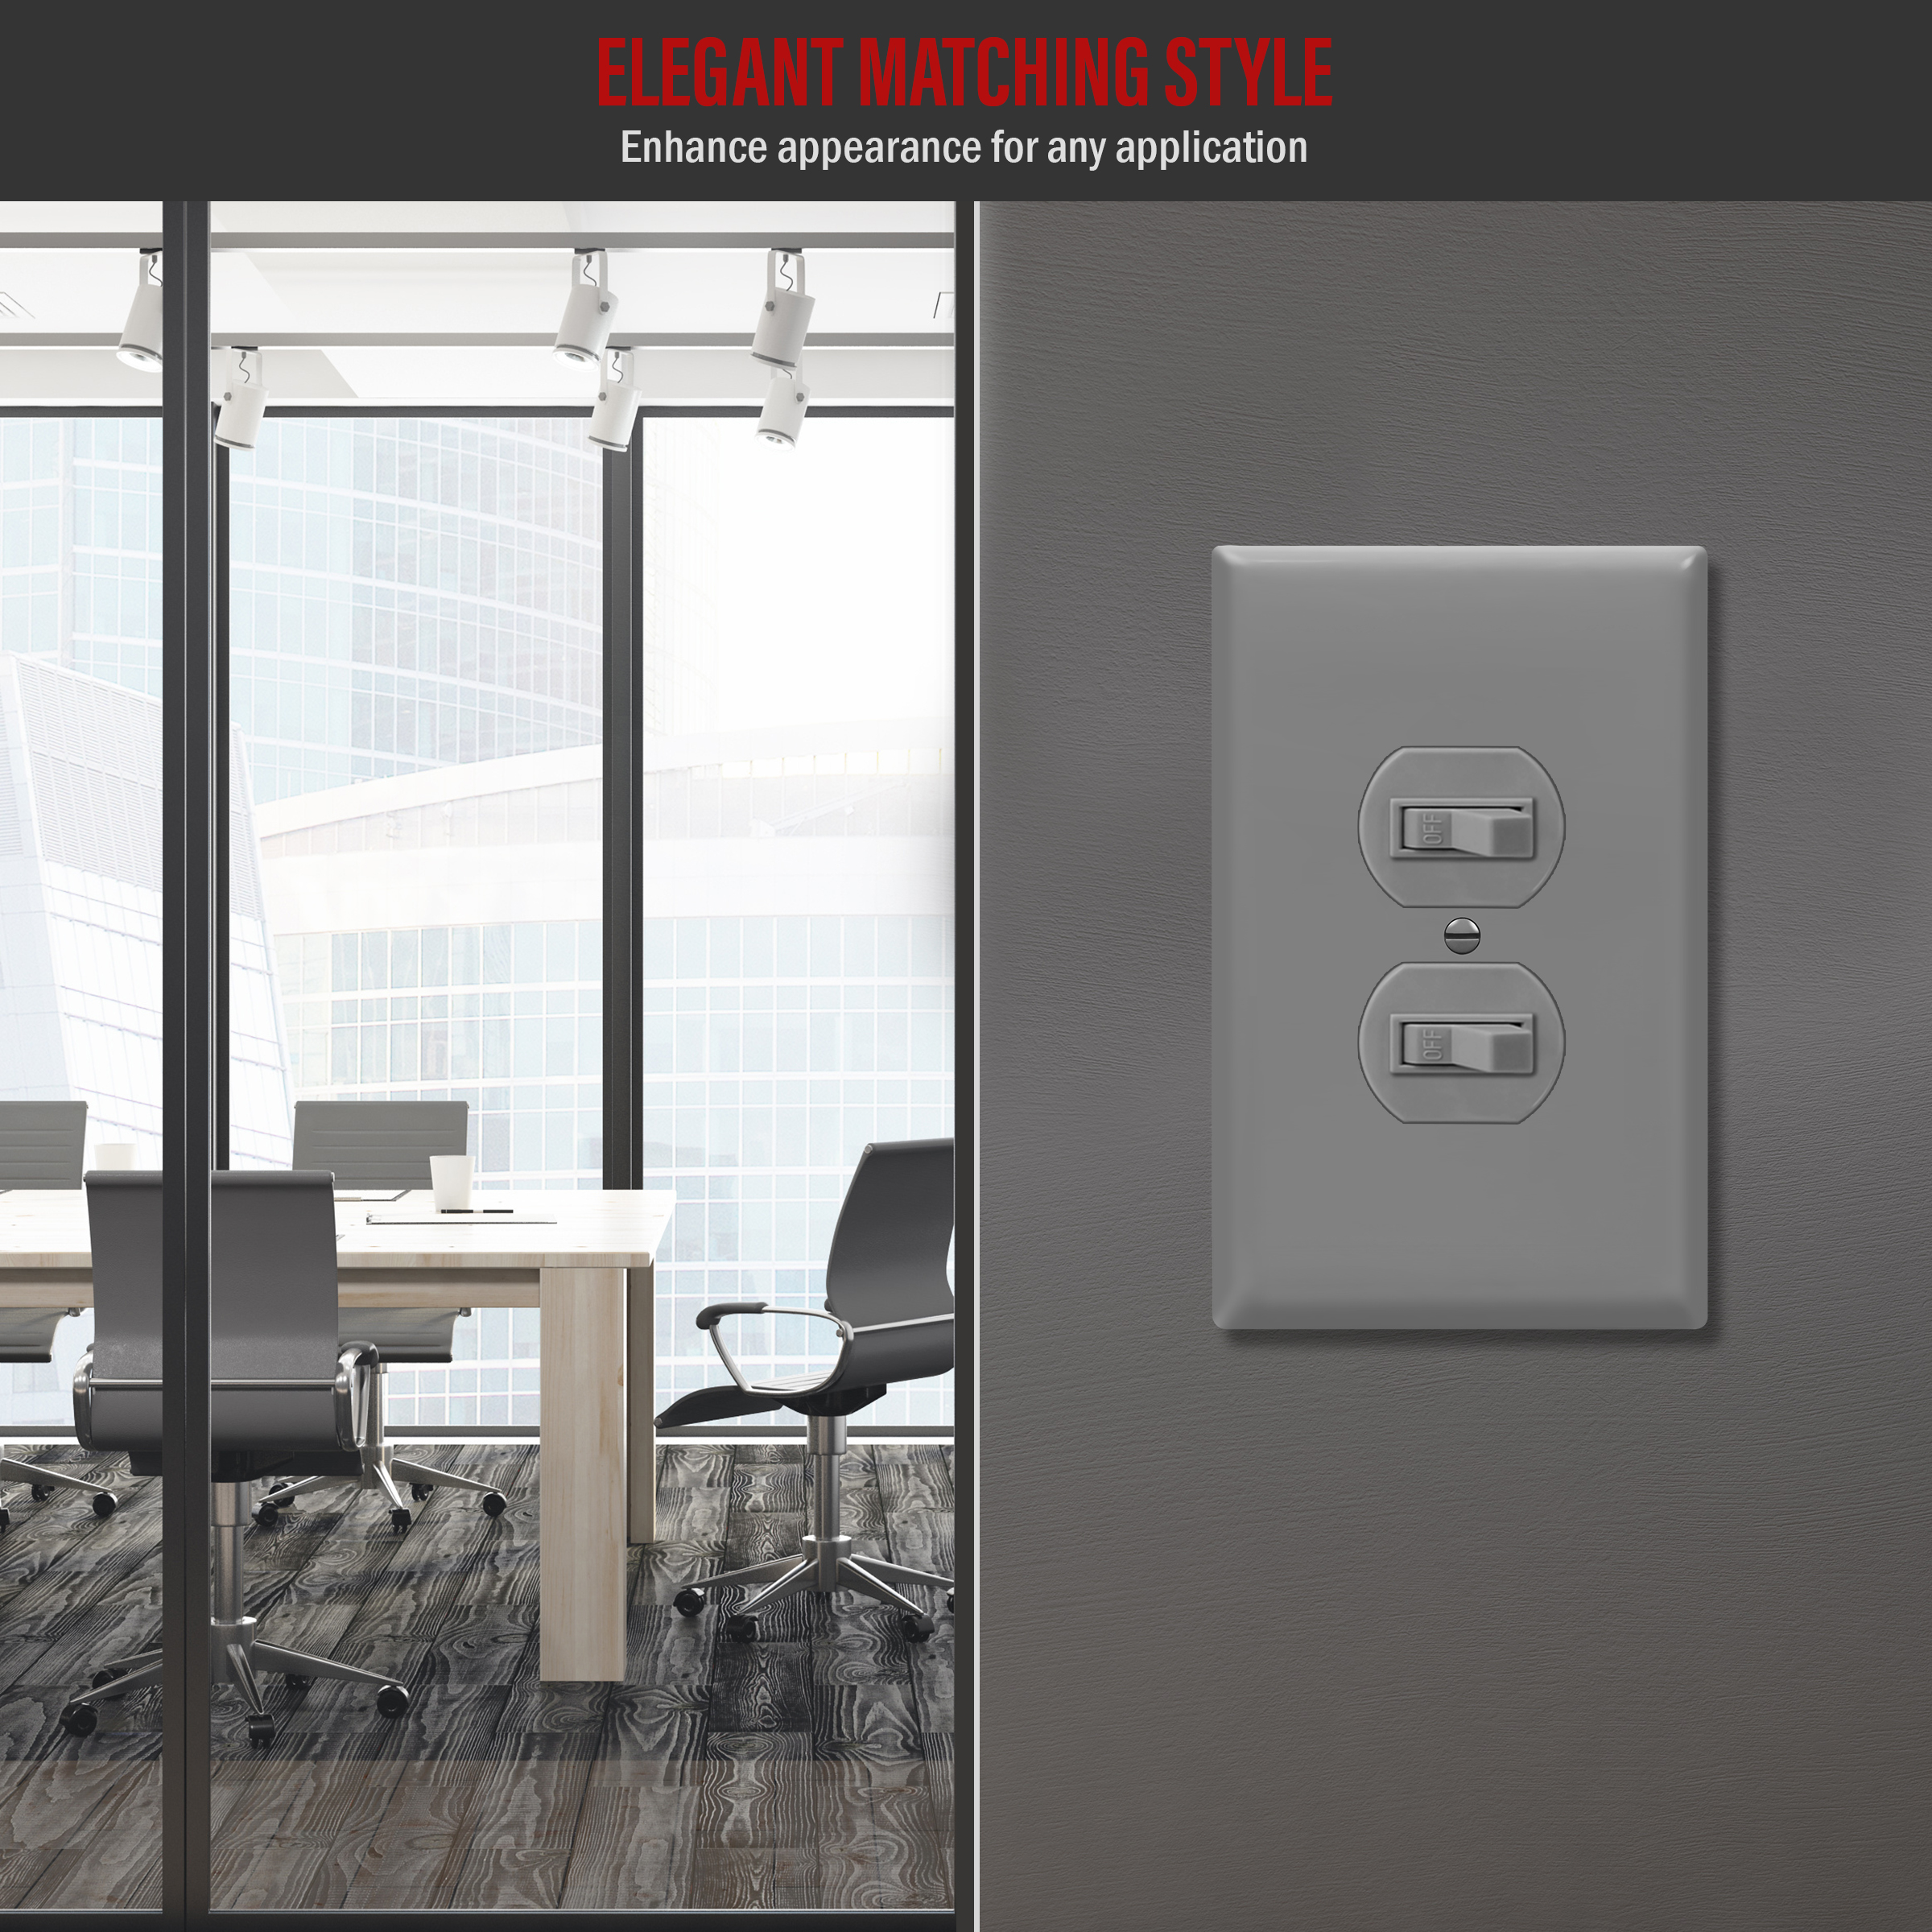 ENERLITES Duplex Receptacle Outlet Wall Plate, Jumbo Electrical Outlet Cover, Gloss Finish, Oversized 1-Gang, Polycarbonate Thermoplastic, 8821O-GY, Gray - image 5 of 5